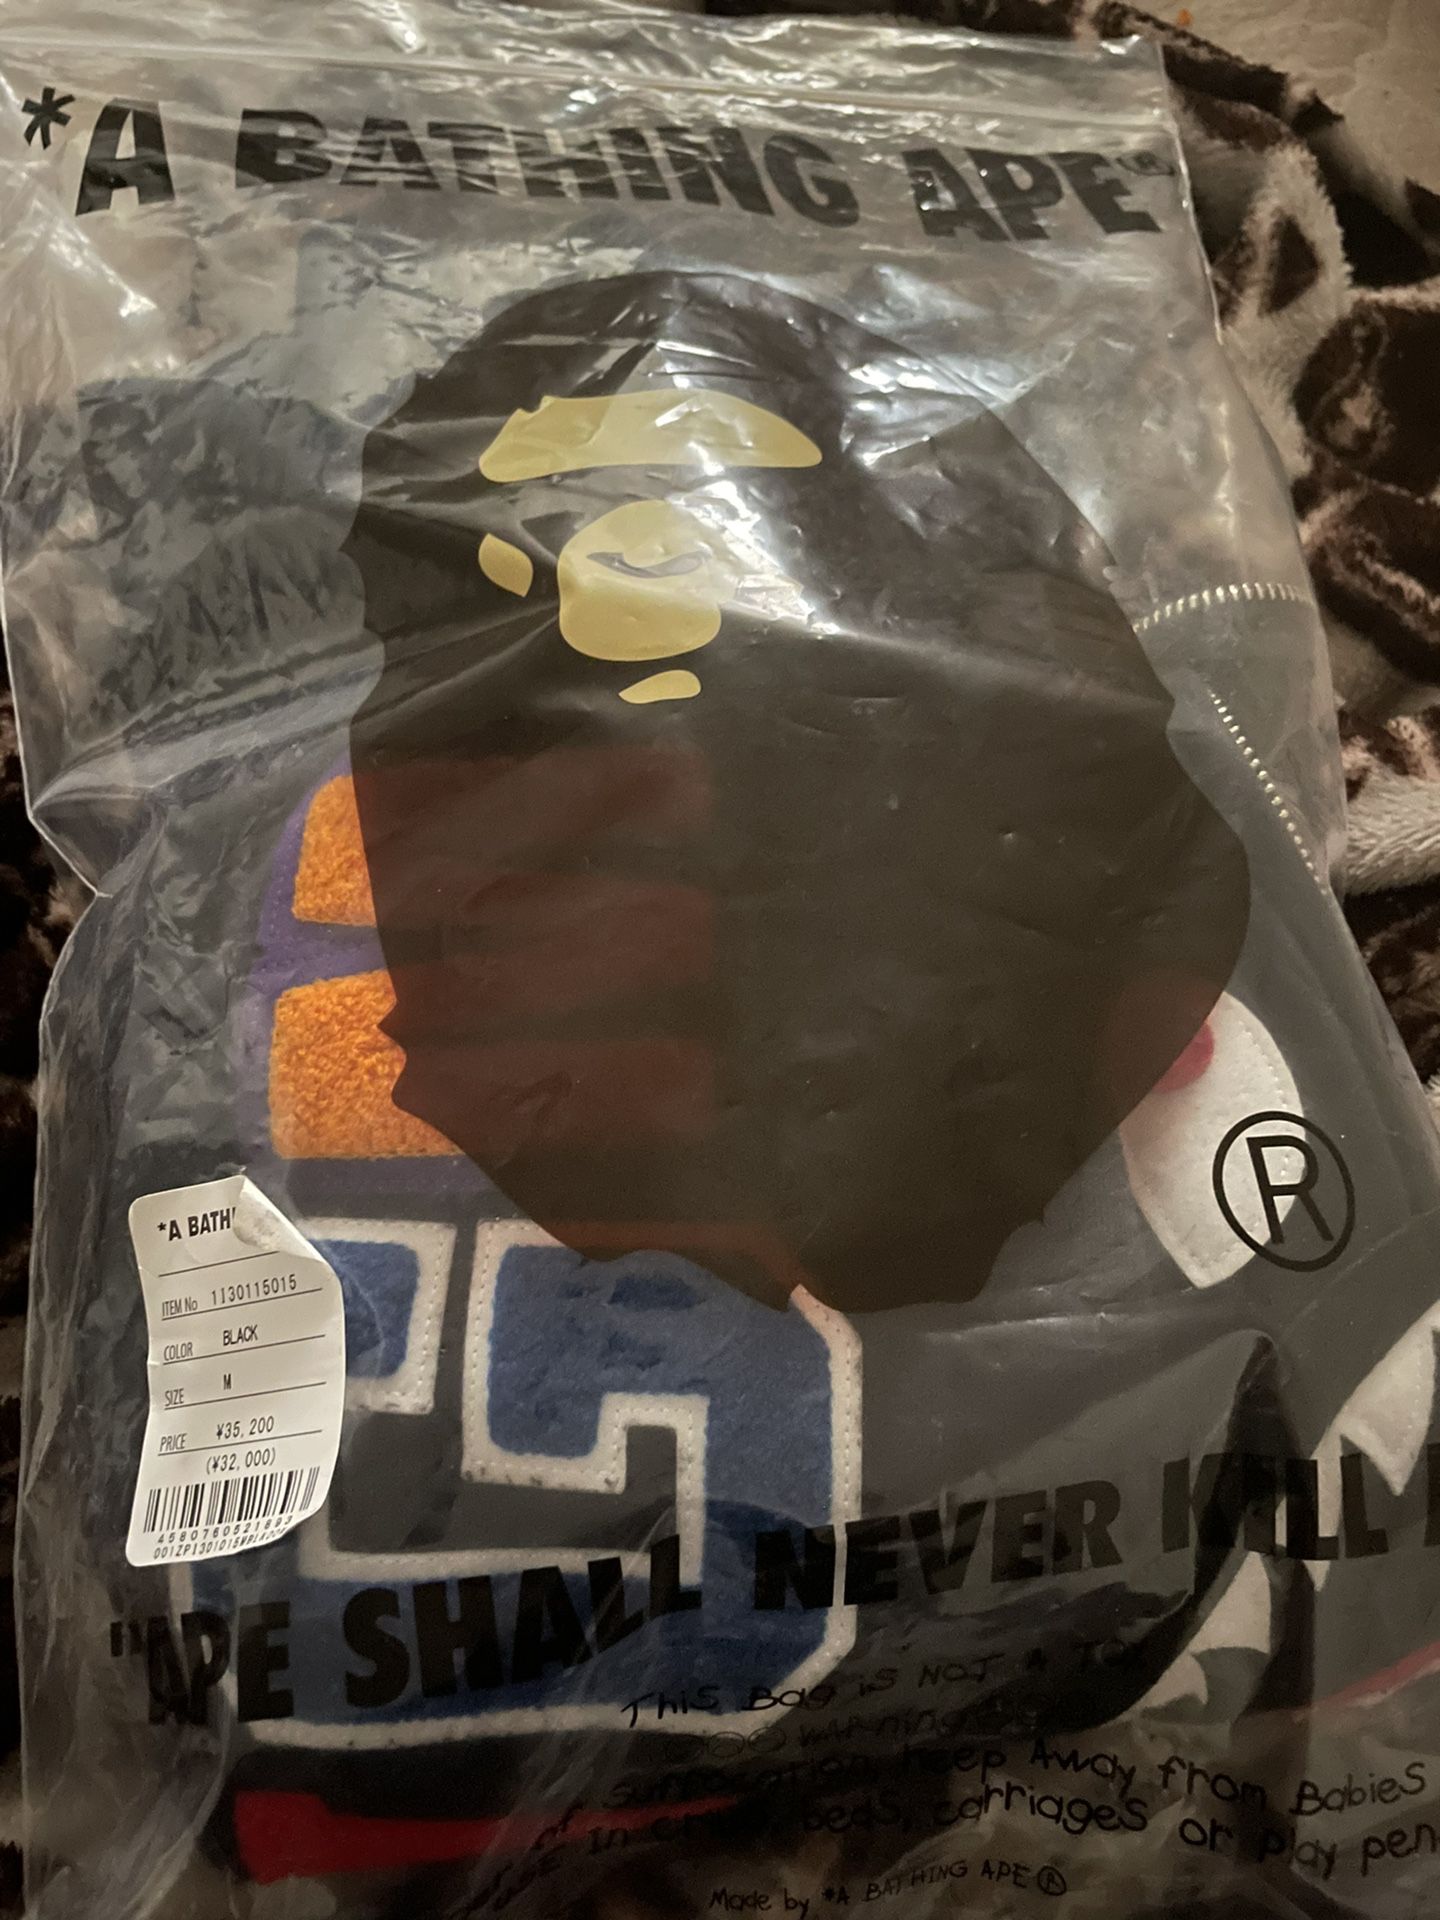 bape hoodie with stockx receipt and bag, size M